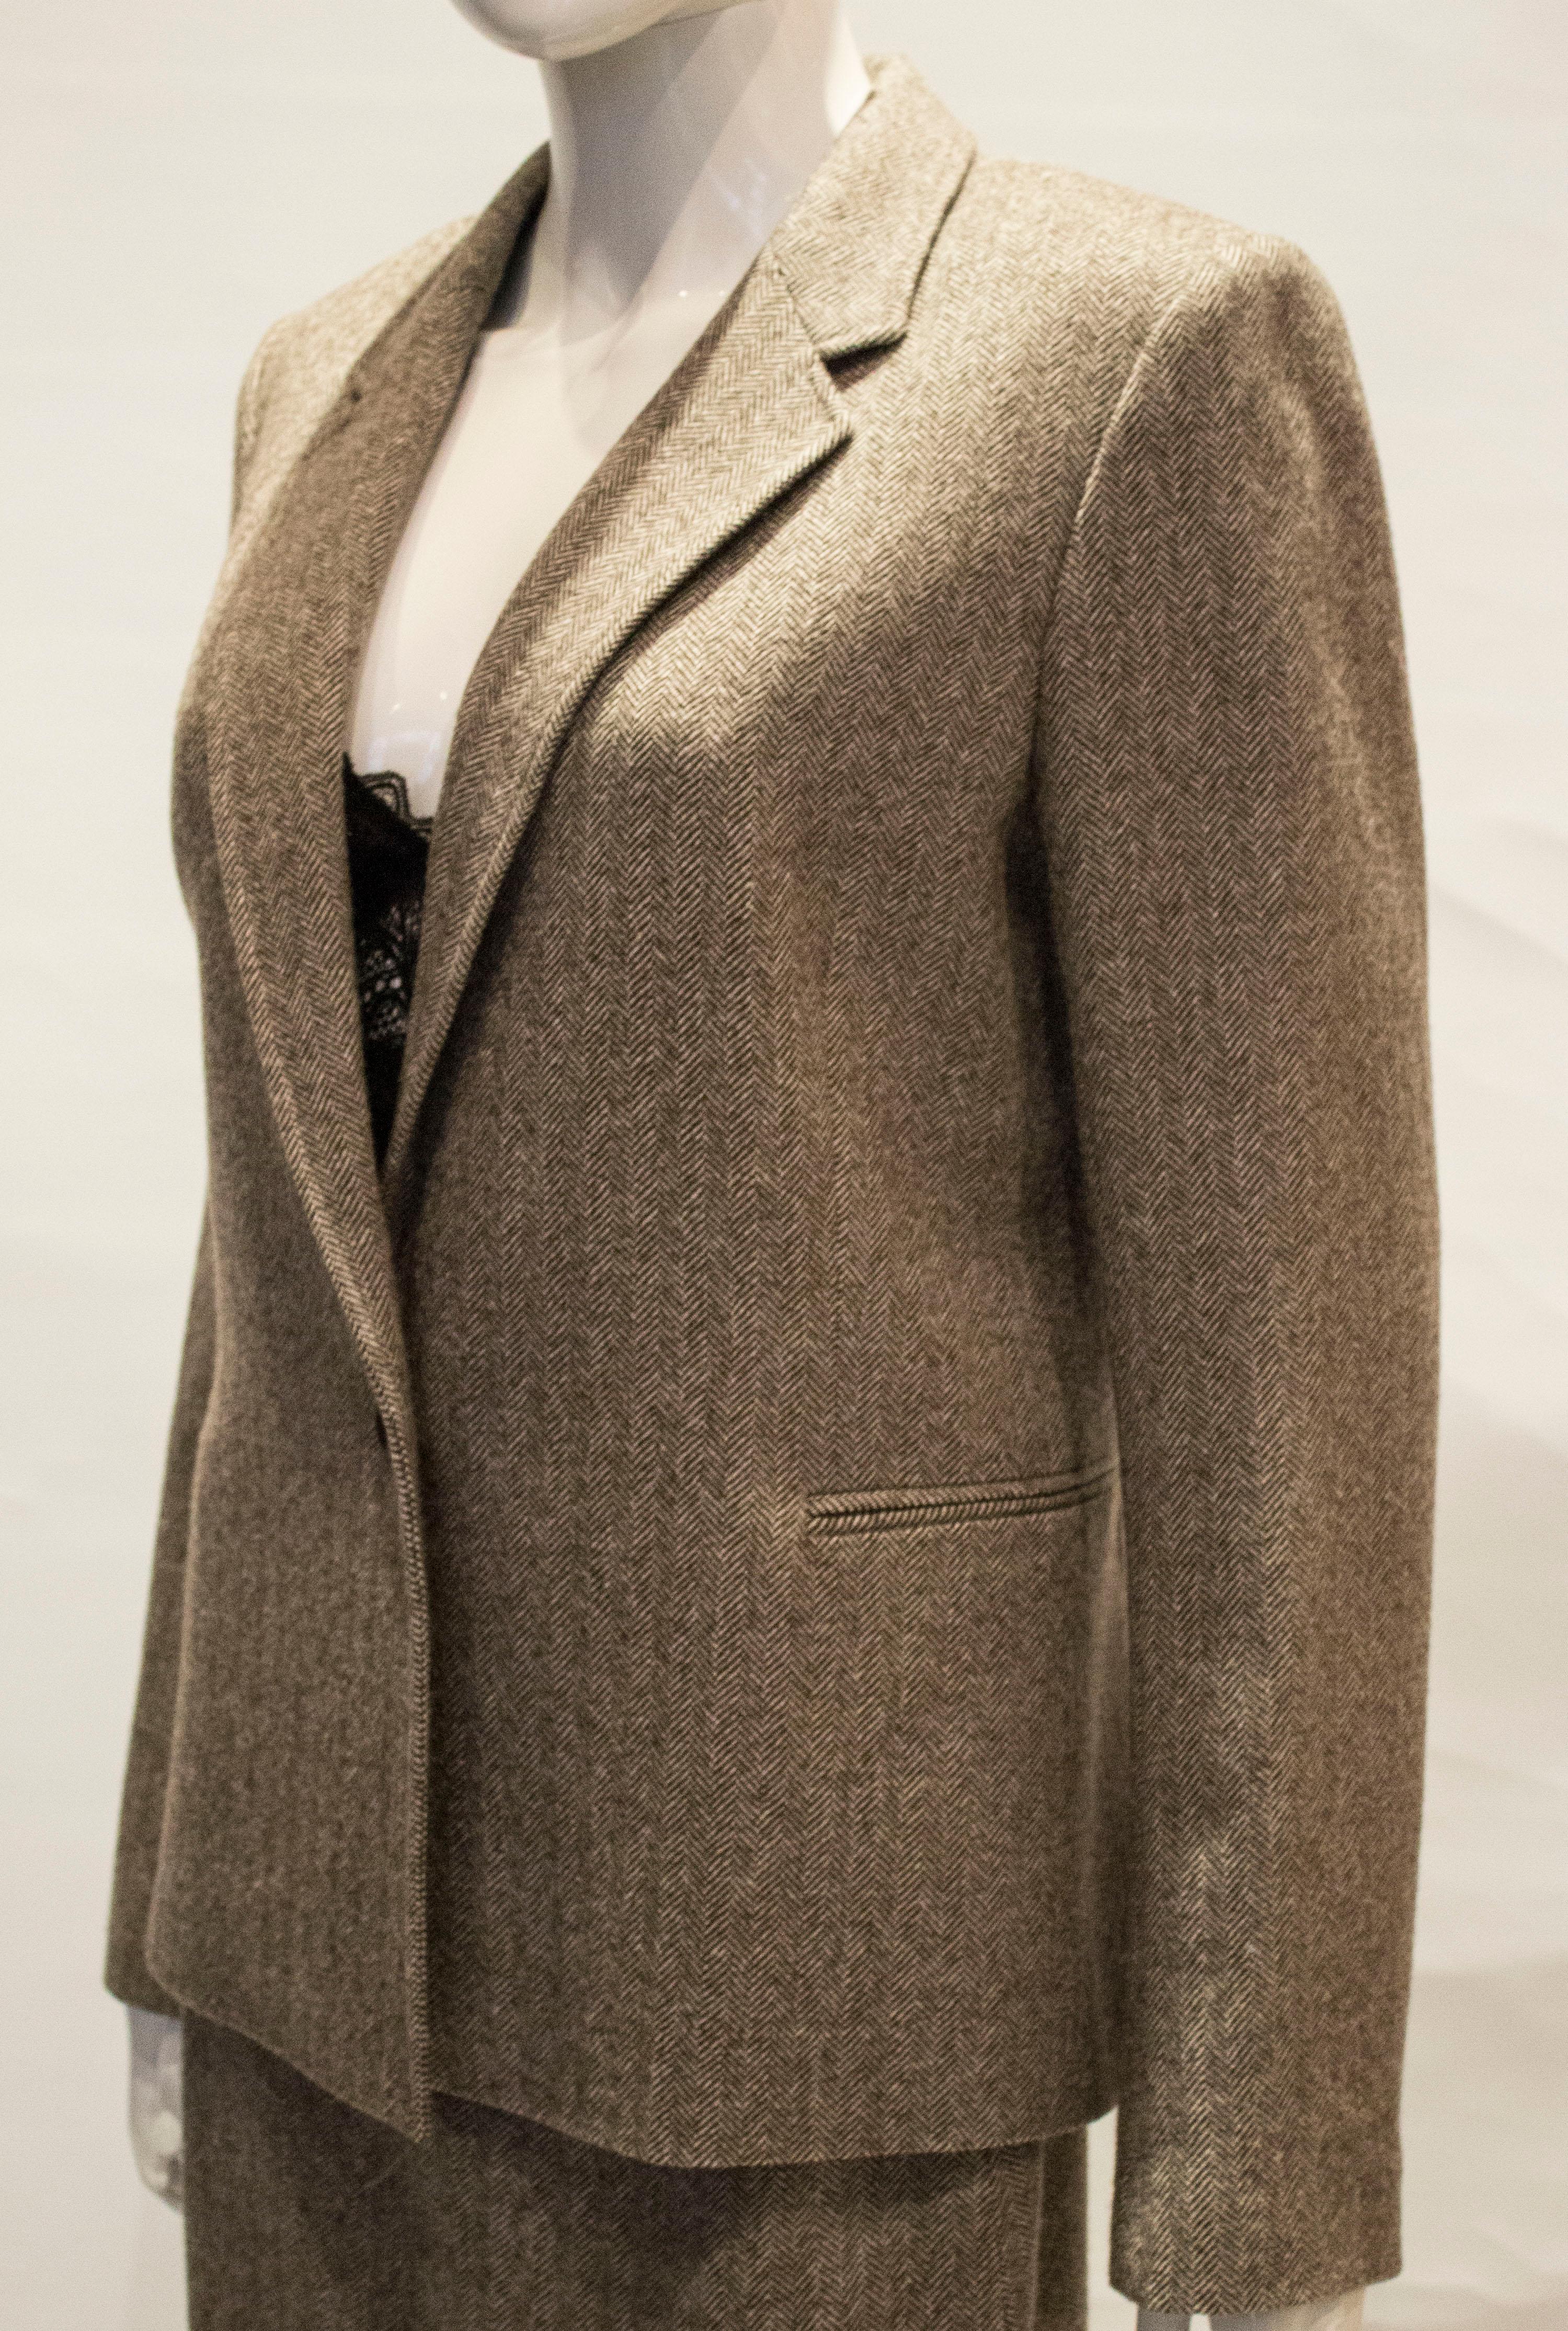 A lovely autumnal wool jacket by joseph 

The jacket has a one button opening and a pocket on either side .
Bust 39'',length 25''